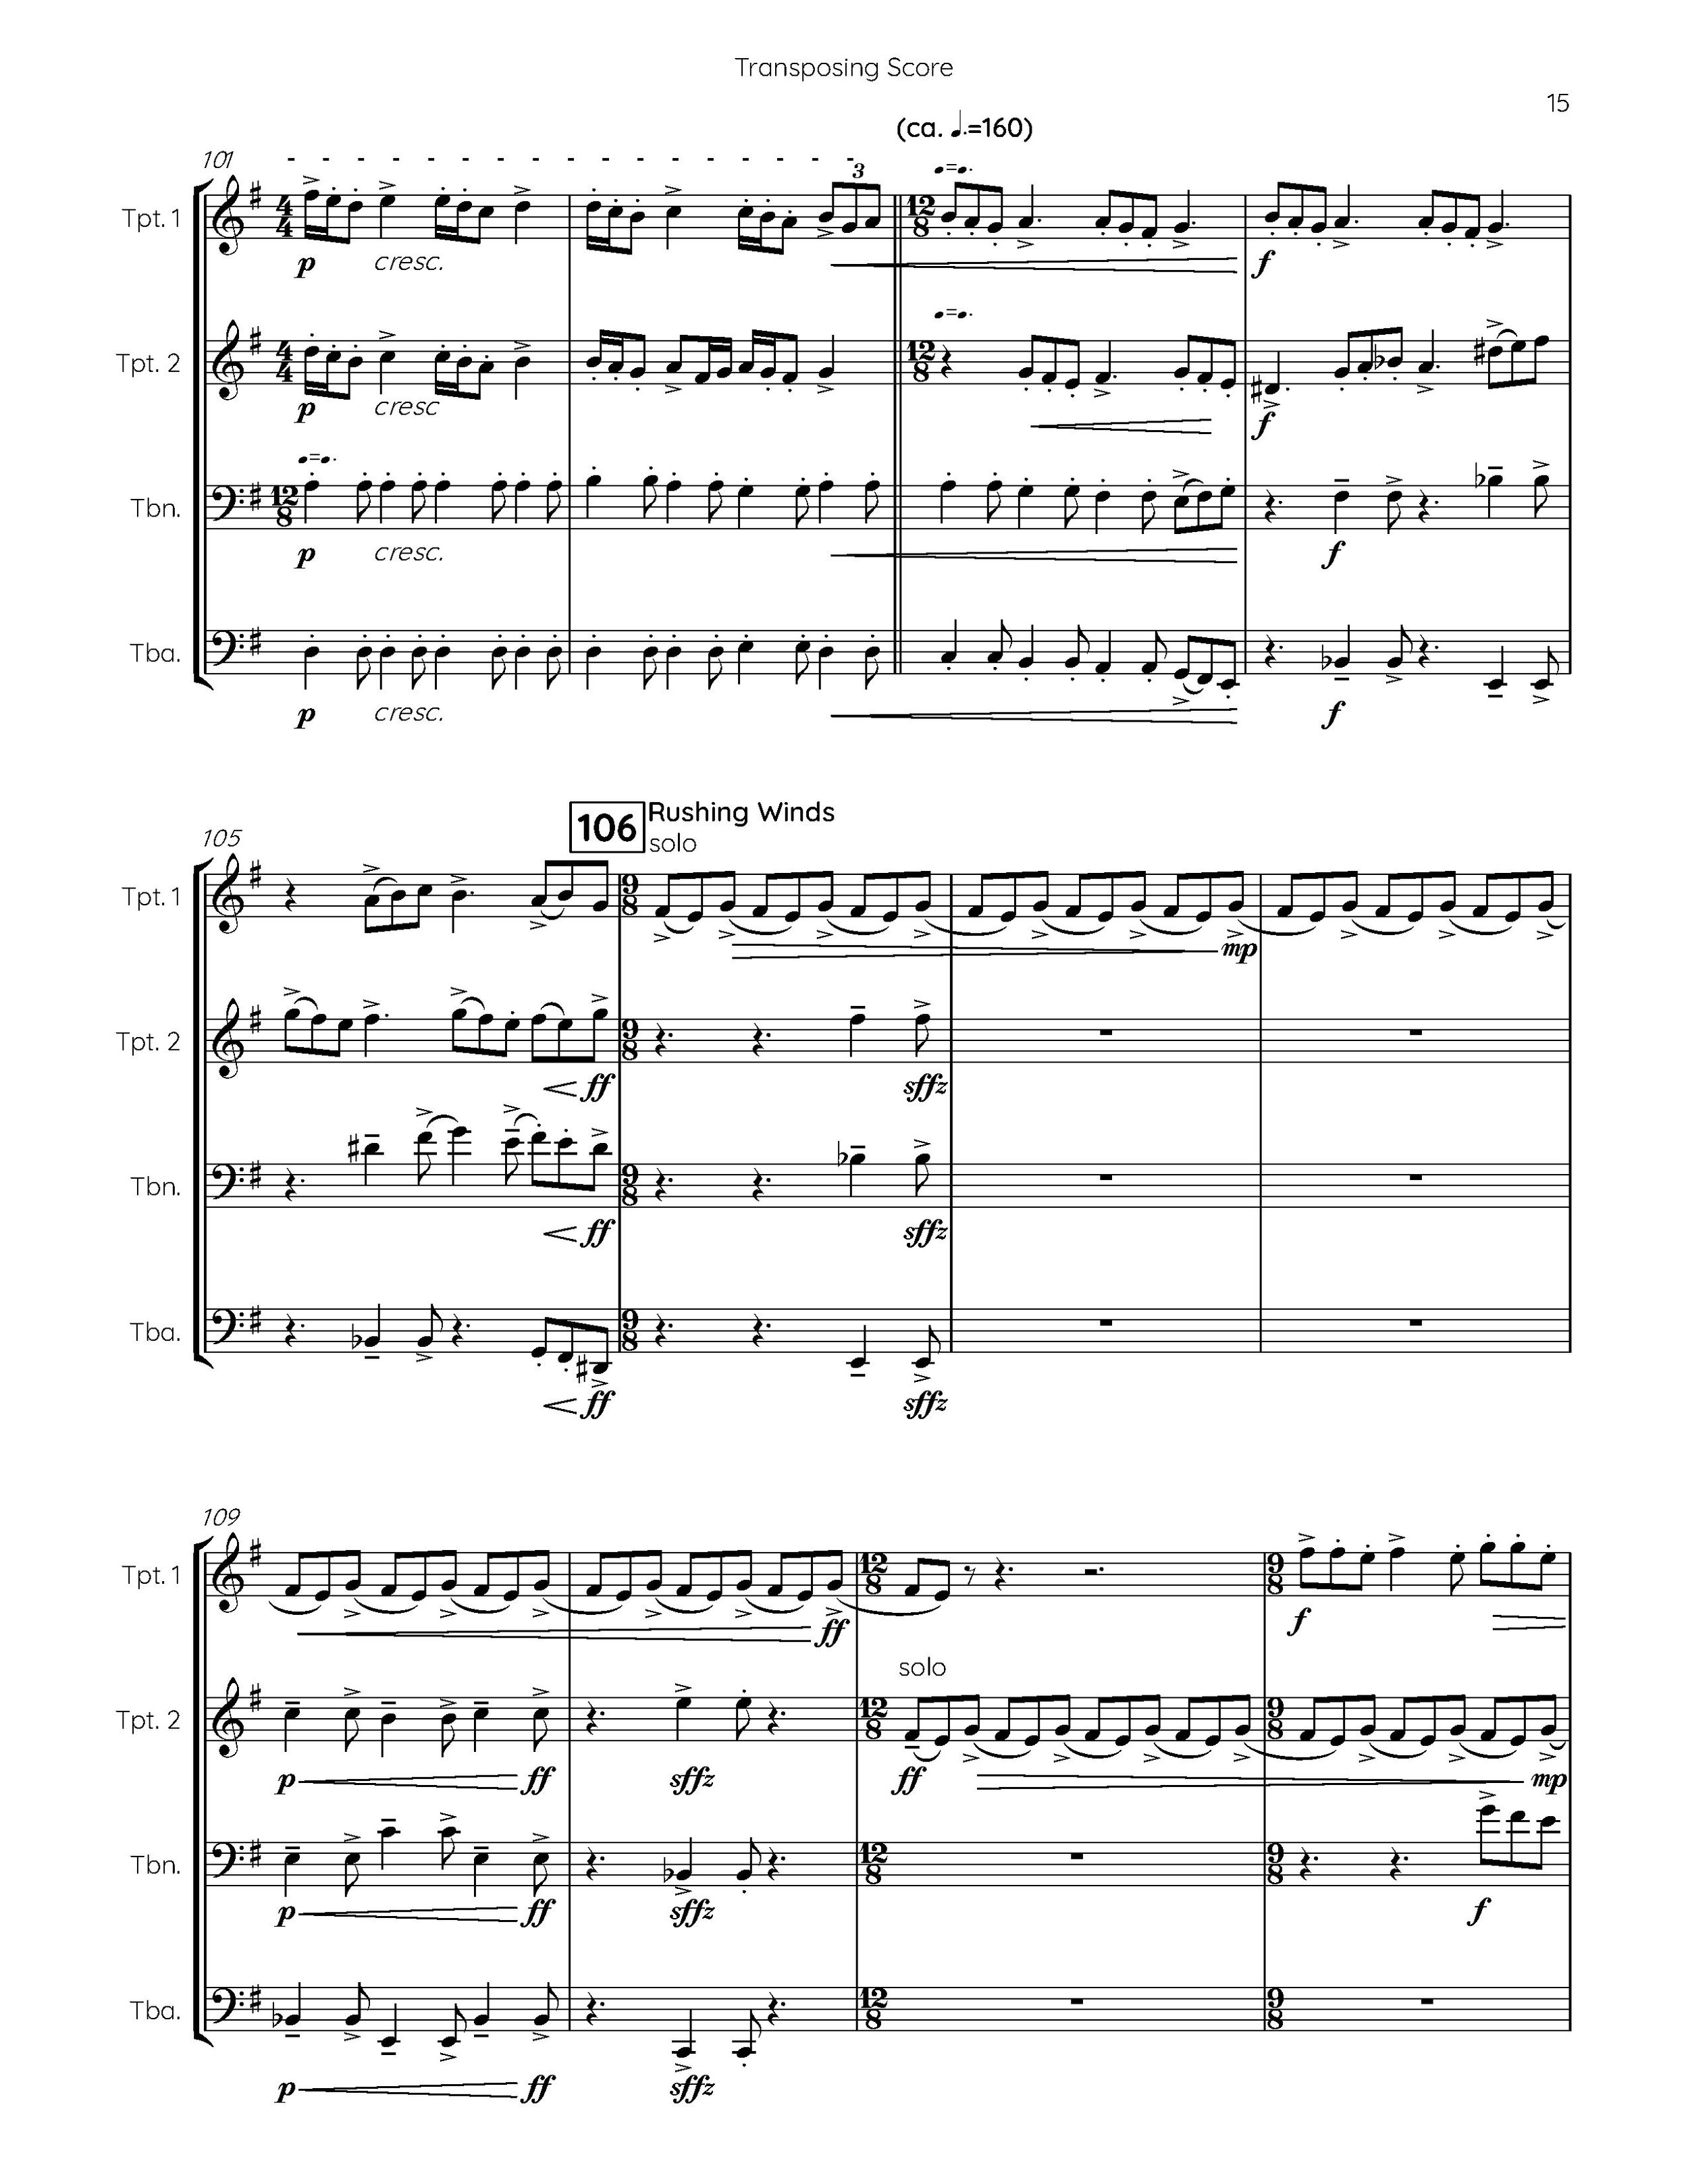 v1.2 Journey to the Ends of the World I. Horn Call - Transposing Score_Page_15.jpg